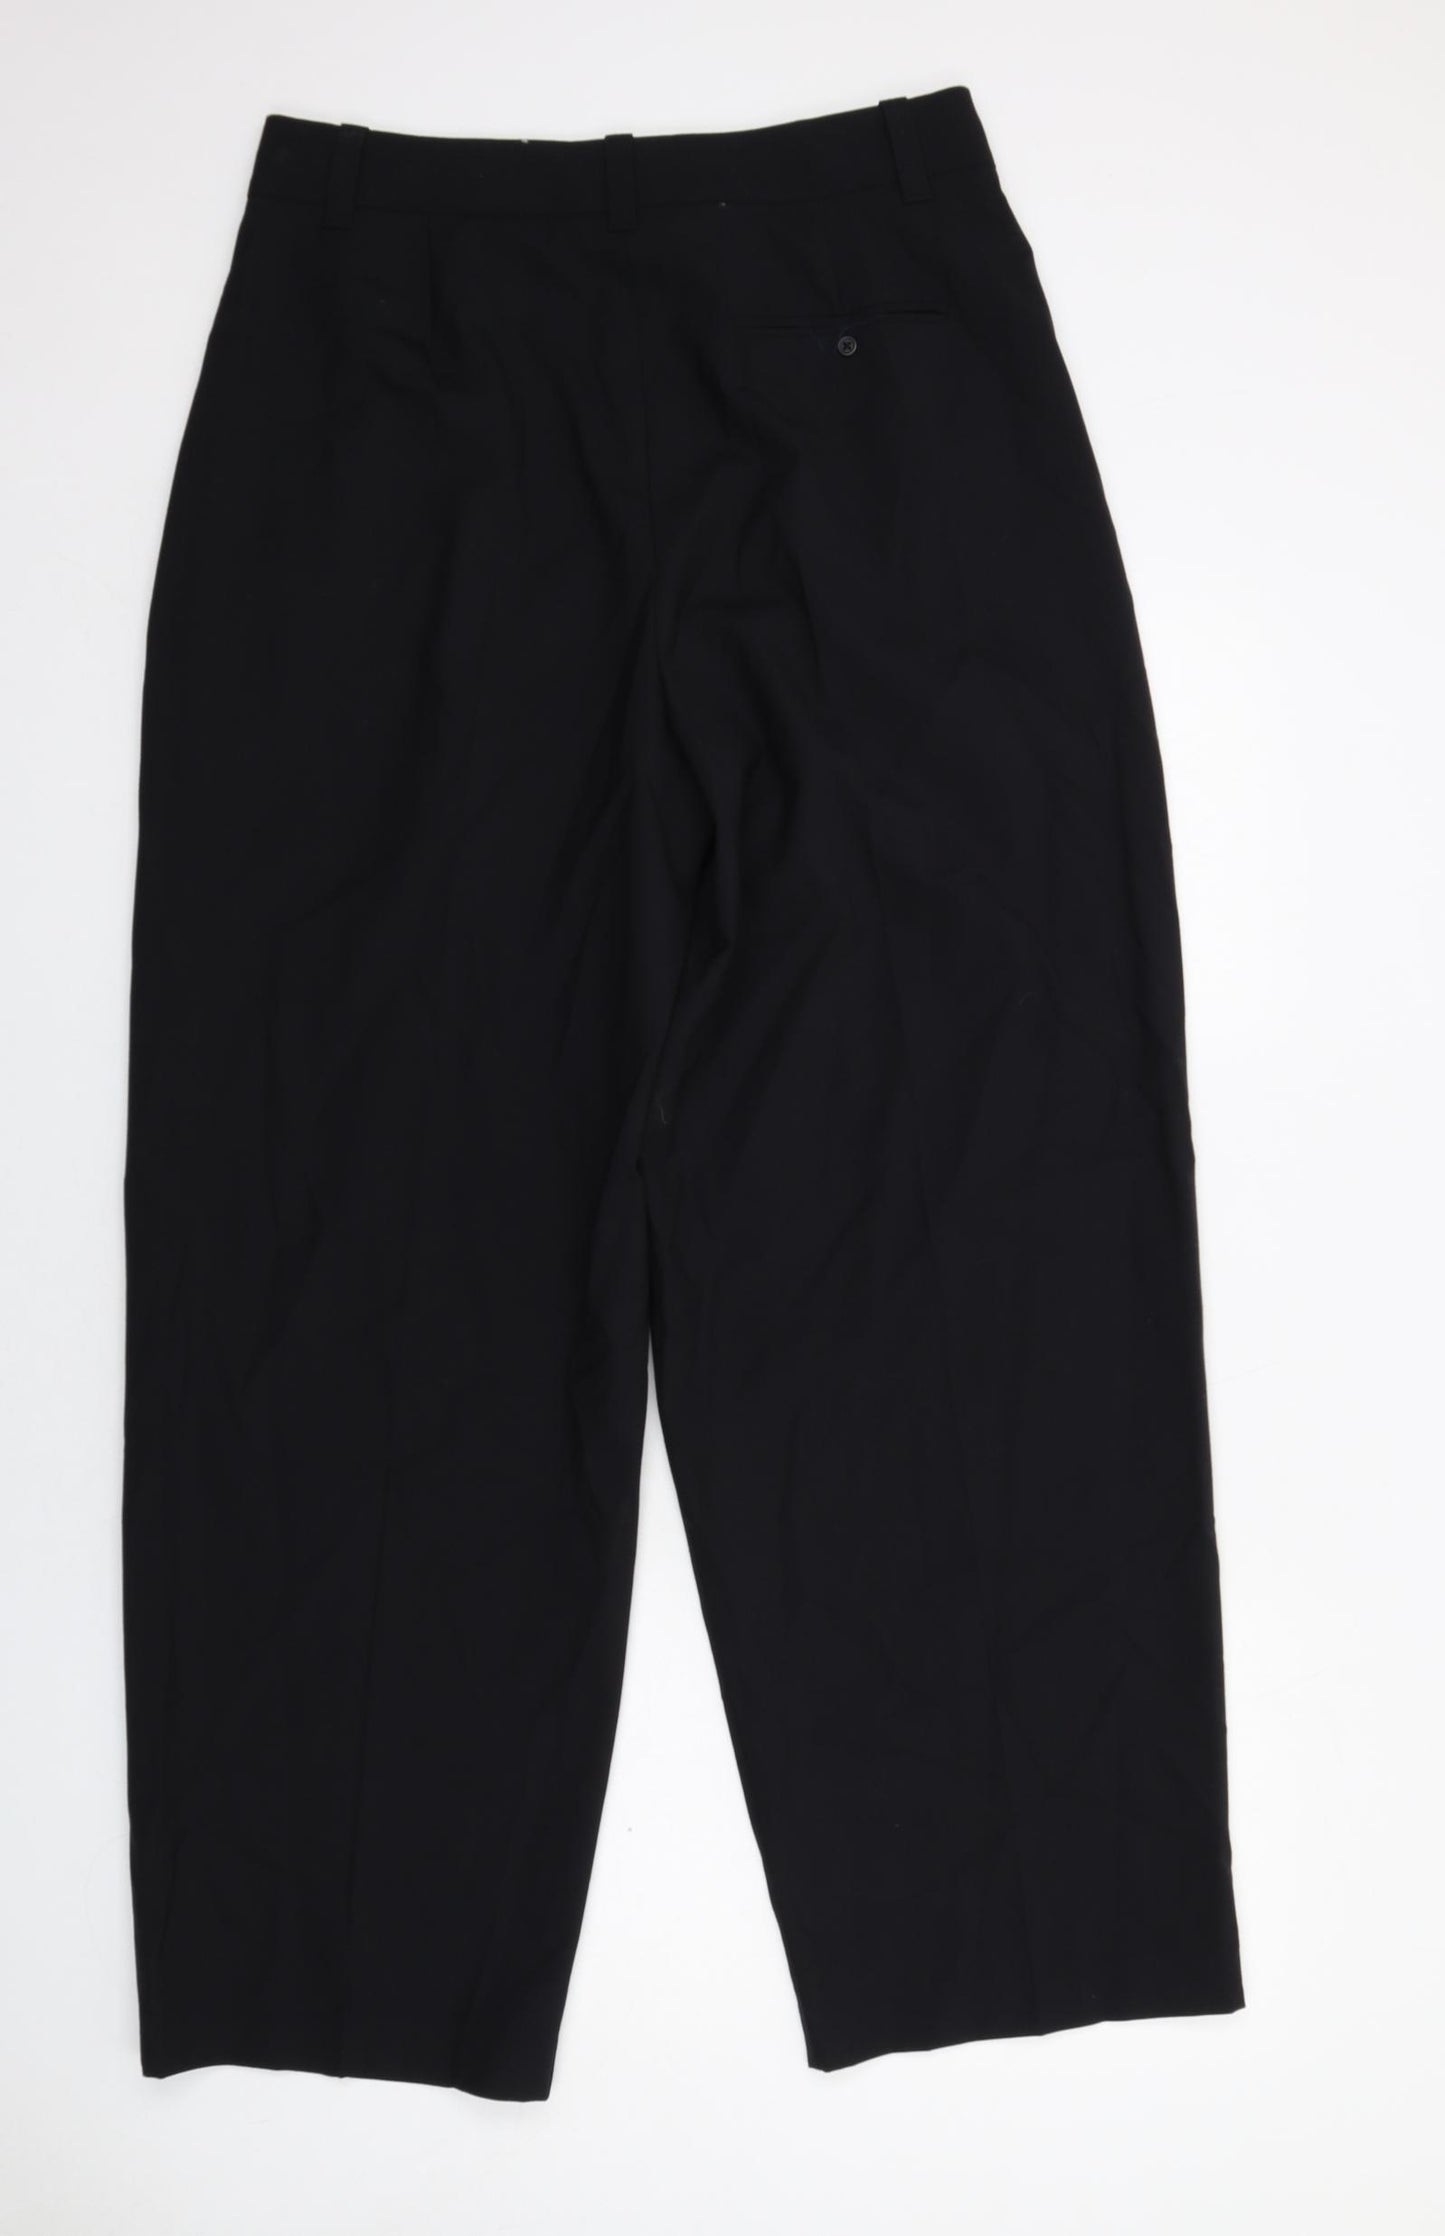 Marks and Spencer Womens Black Polyester Trousers Size 14 Regular Zip